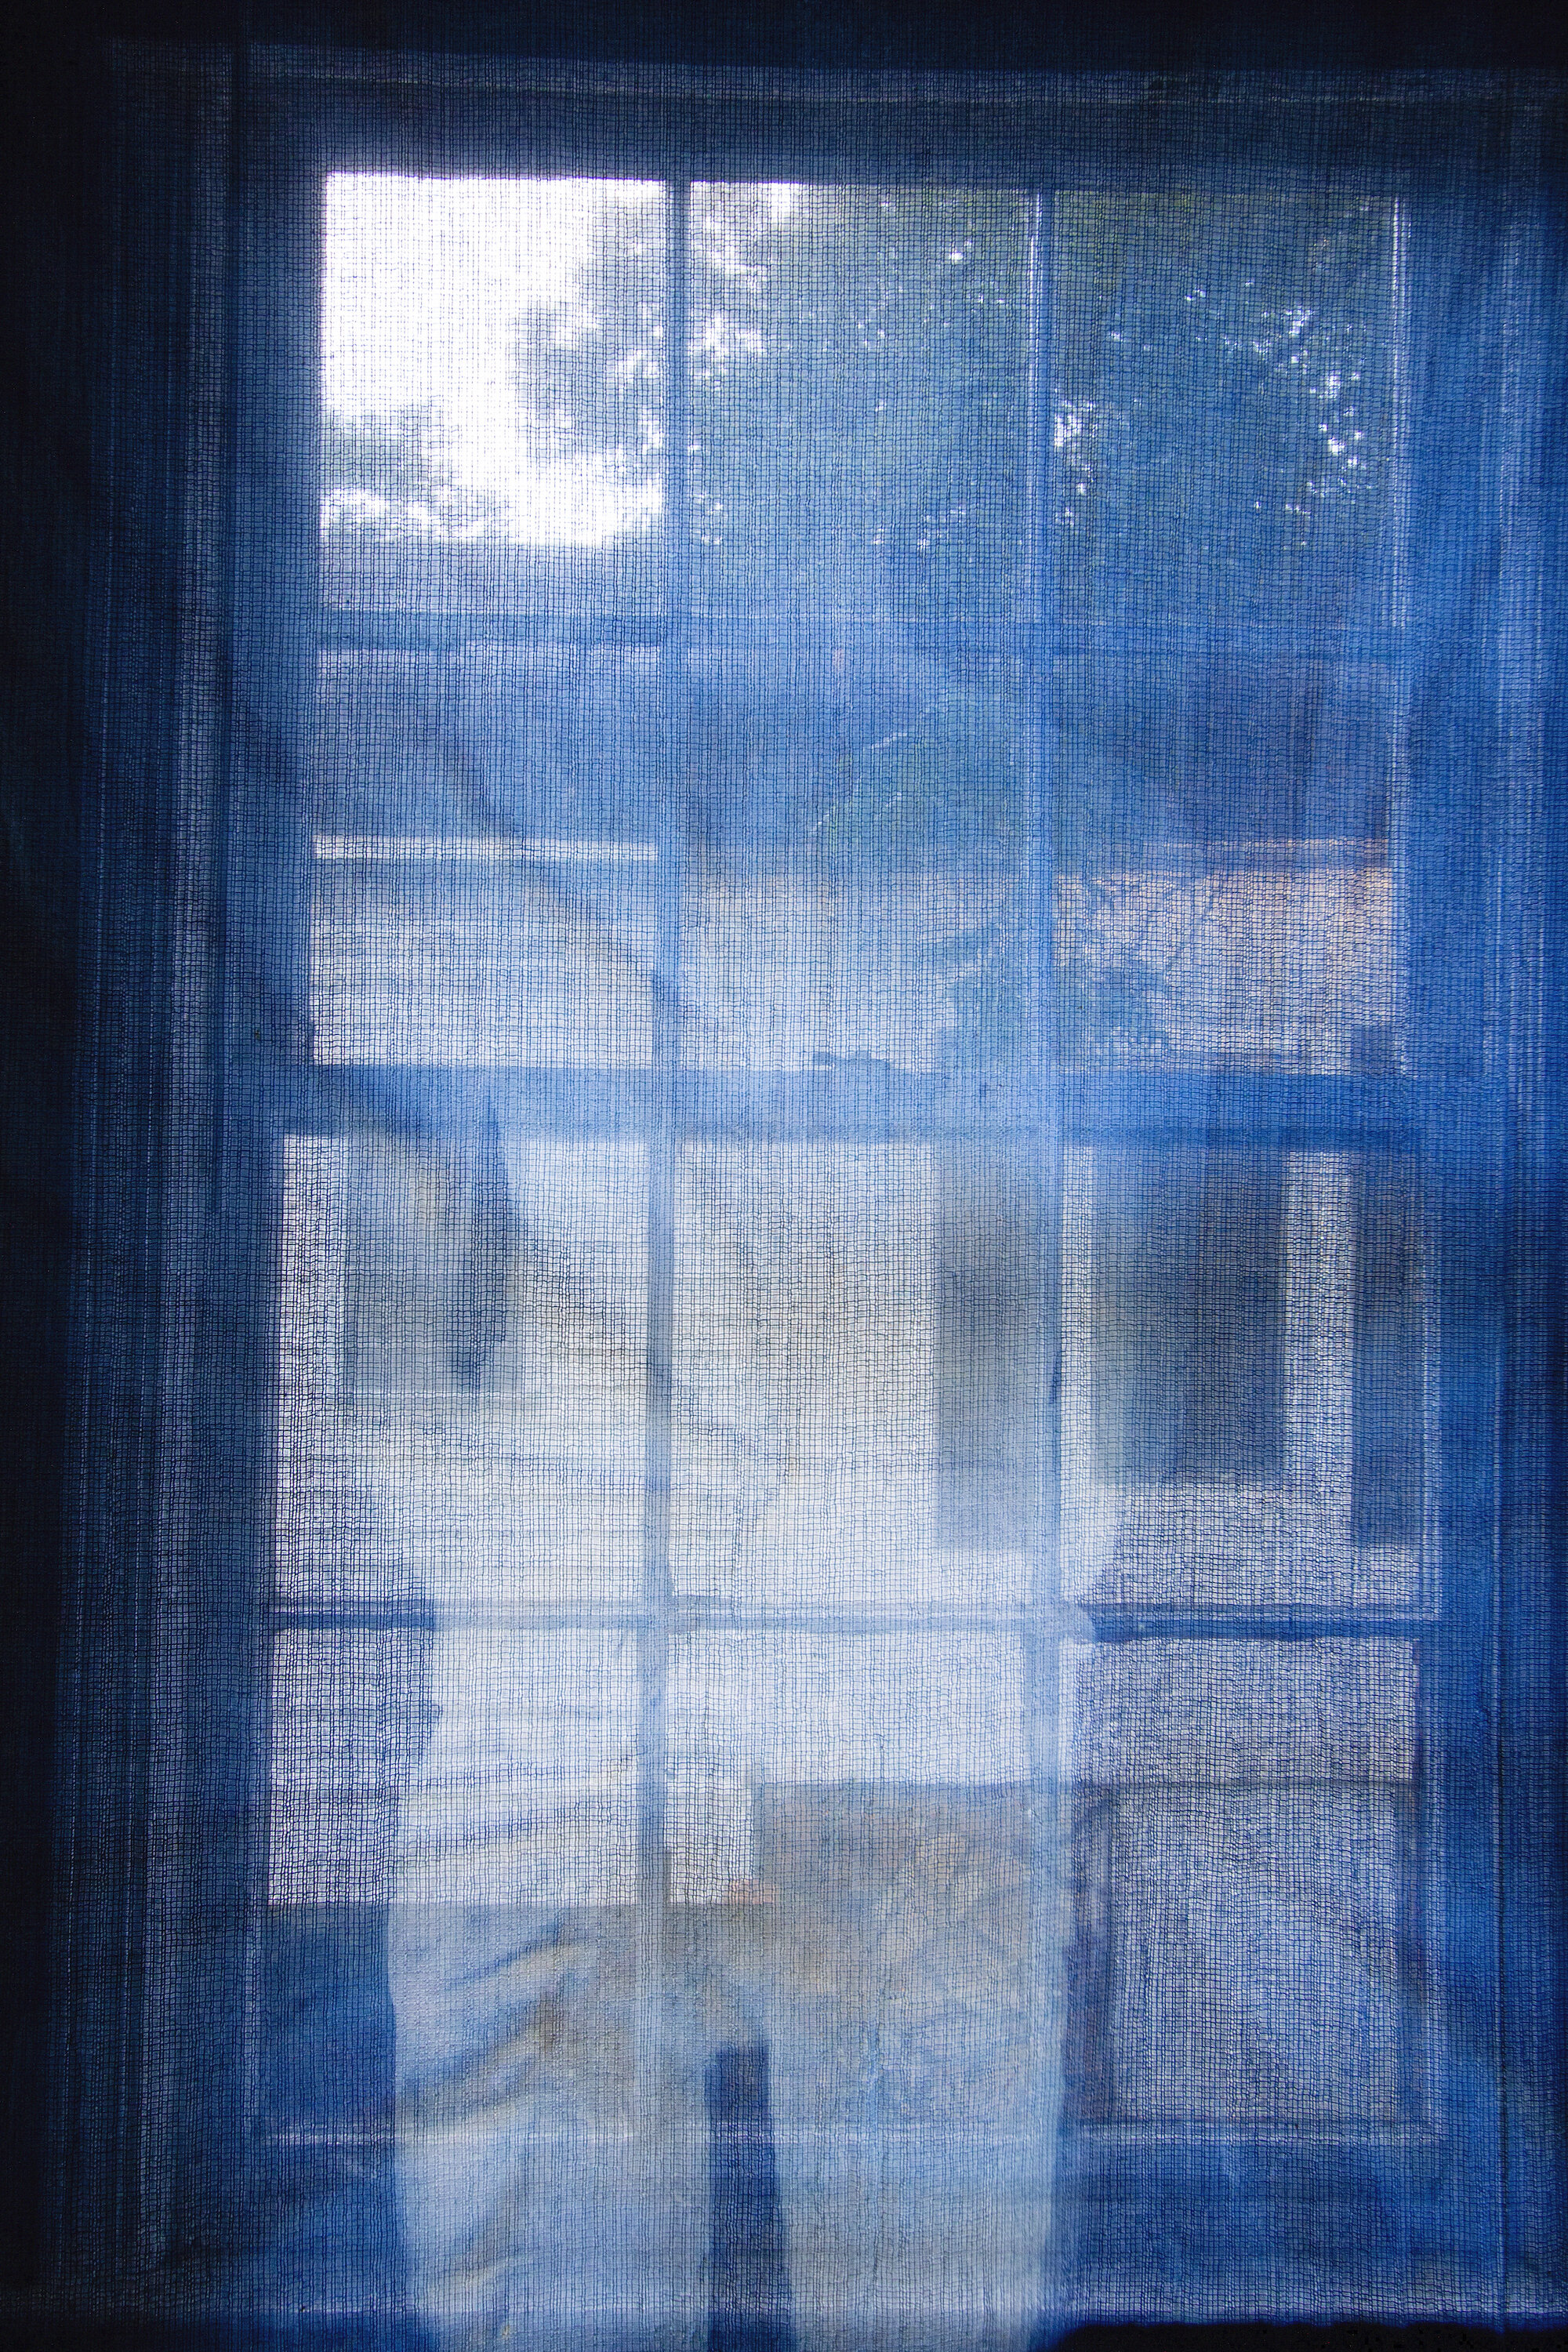 Fading (detail) [early evening], 2020, cotton curtain, cyanotype solution, curtain rod, and hardware, 55 x 84 inches.